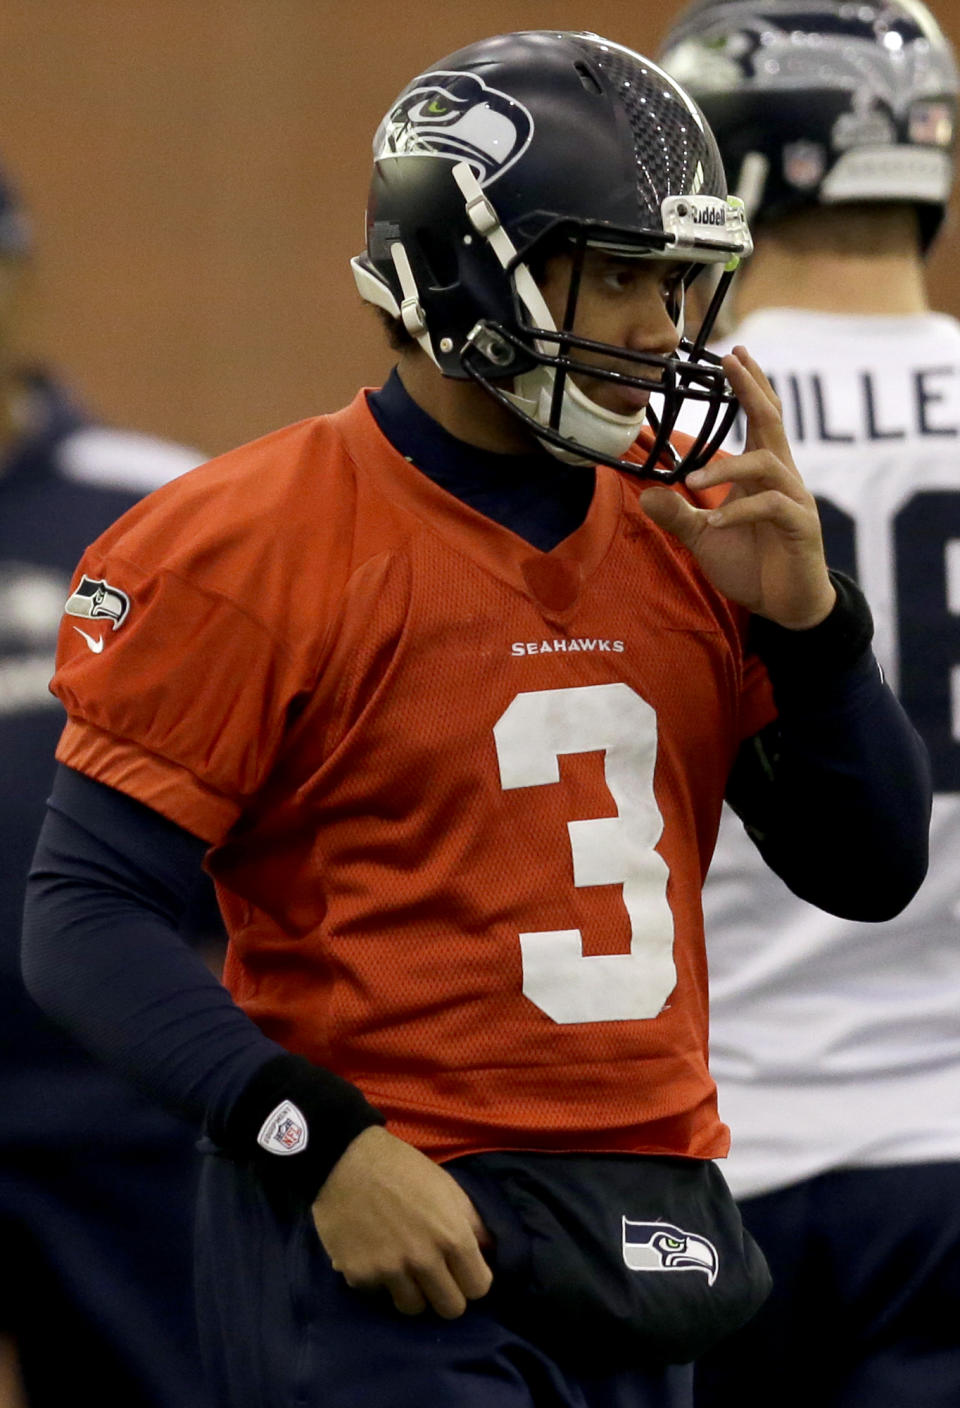 Seattle Seahawks quarterback Russell Wilson adjusts his helmet at the start of NFL football practice Thursday, Jan. 30, 2014, in East Rutherford, N.J. The Seahawks and the Denver Broncos are scheduled to play in the Super Bowl XLVIII football game Sunday, Feb. 2, 2014. (AP Photo)